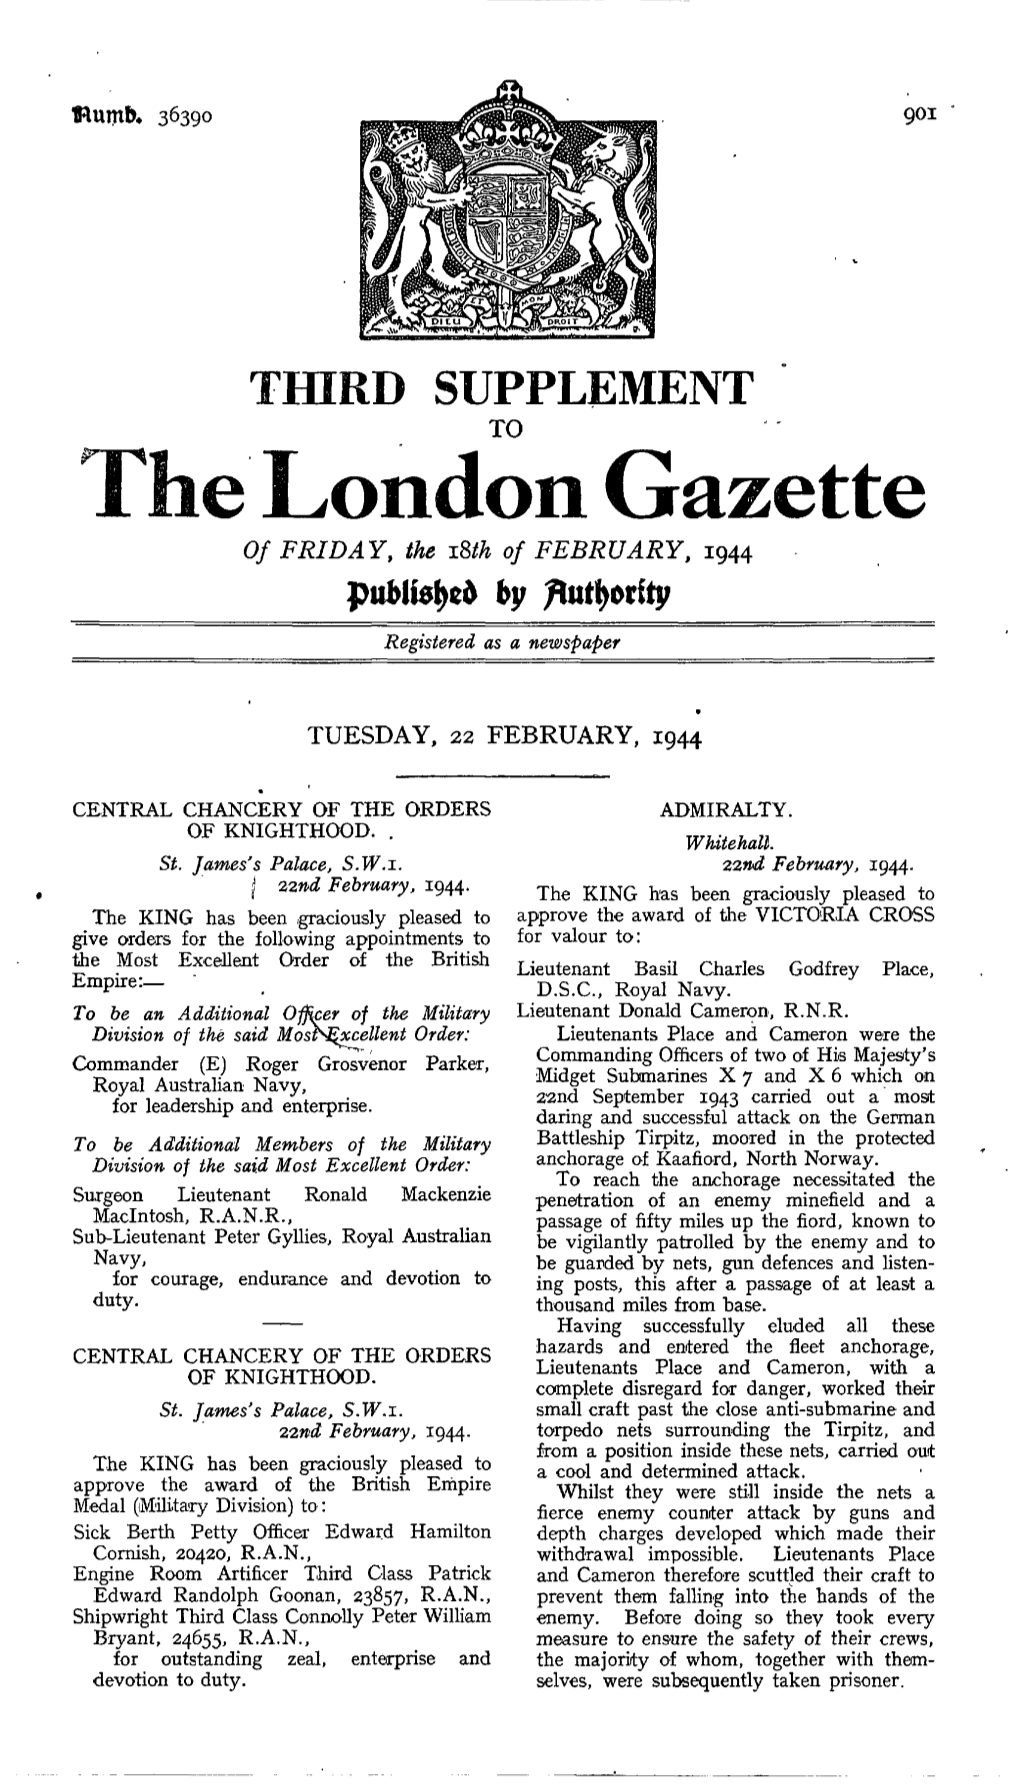 London Gazette of FRIDAY, the Isth of FEBRUARY, 1944 by Registered As a Newspaper